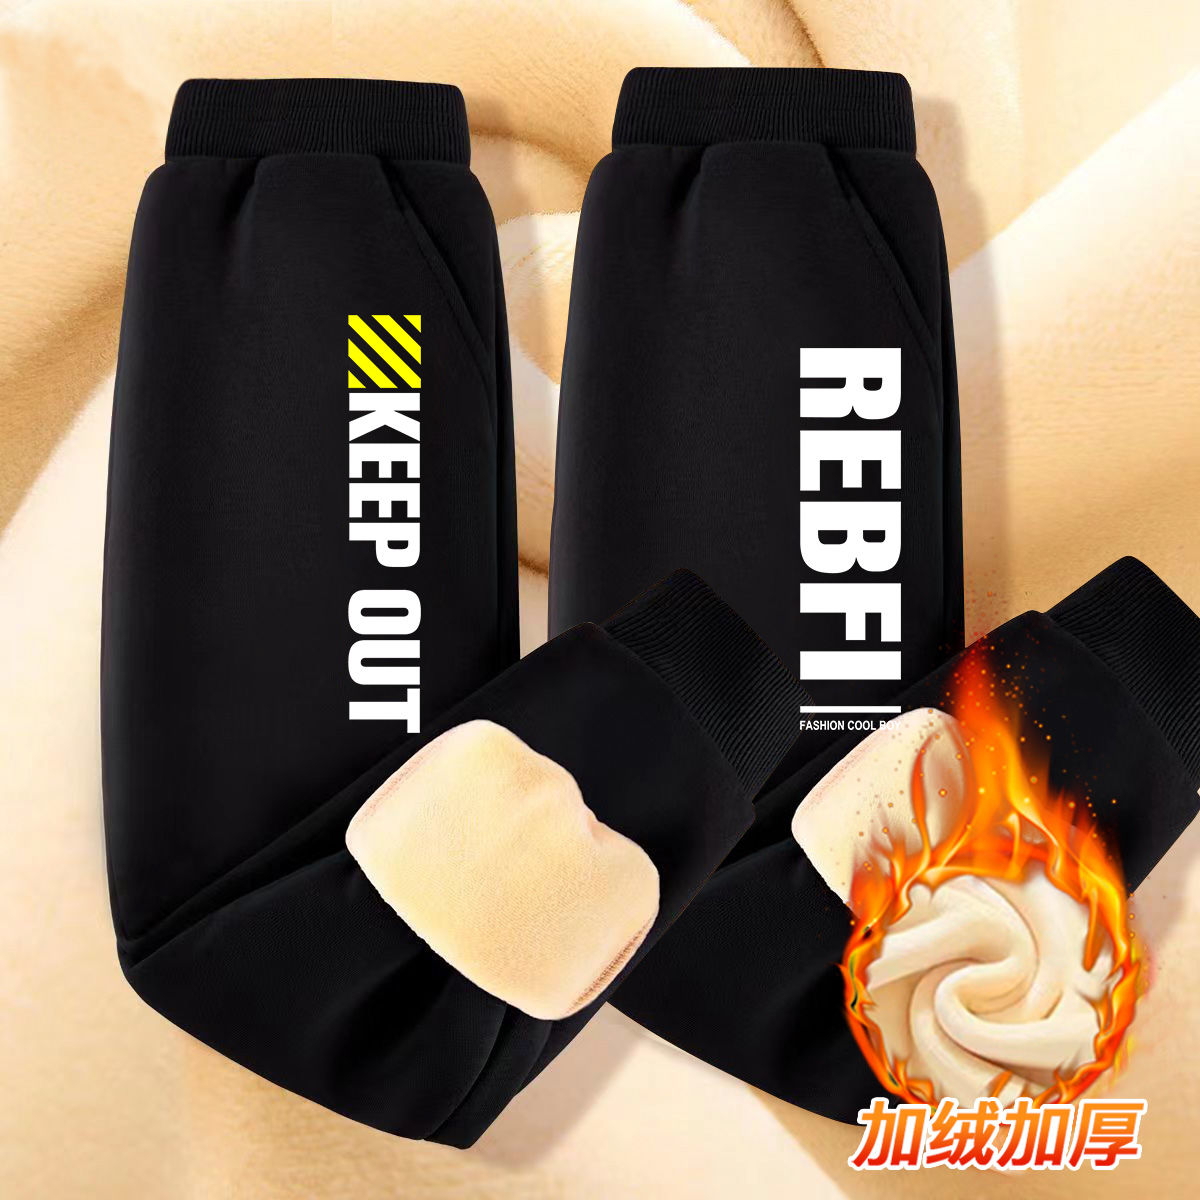 Boys' handsome velvet sweatpants  new cool and handsome warm trousers medium and large children's casual cool and handsome sports pants